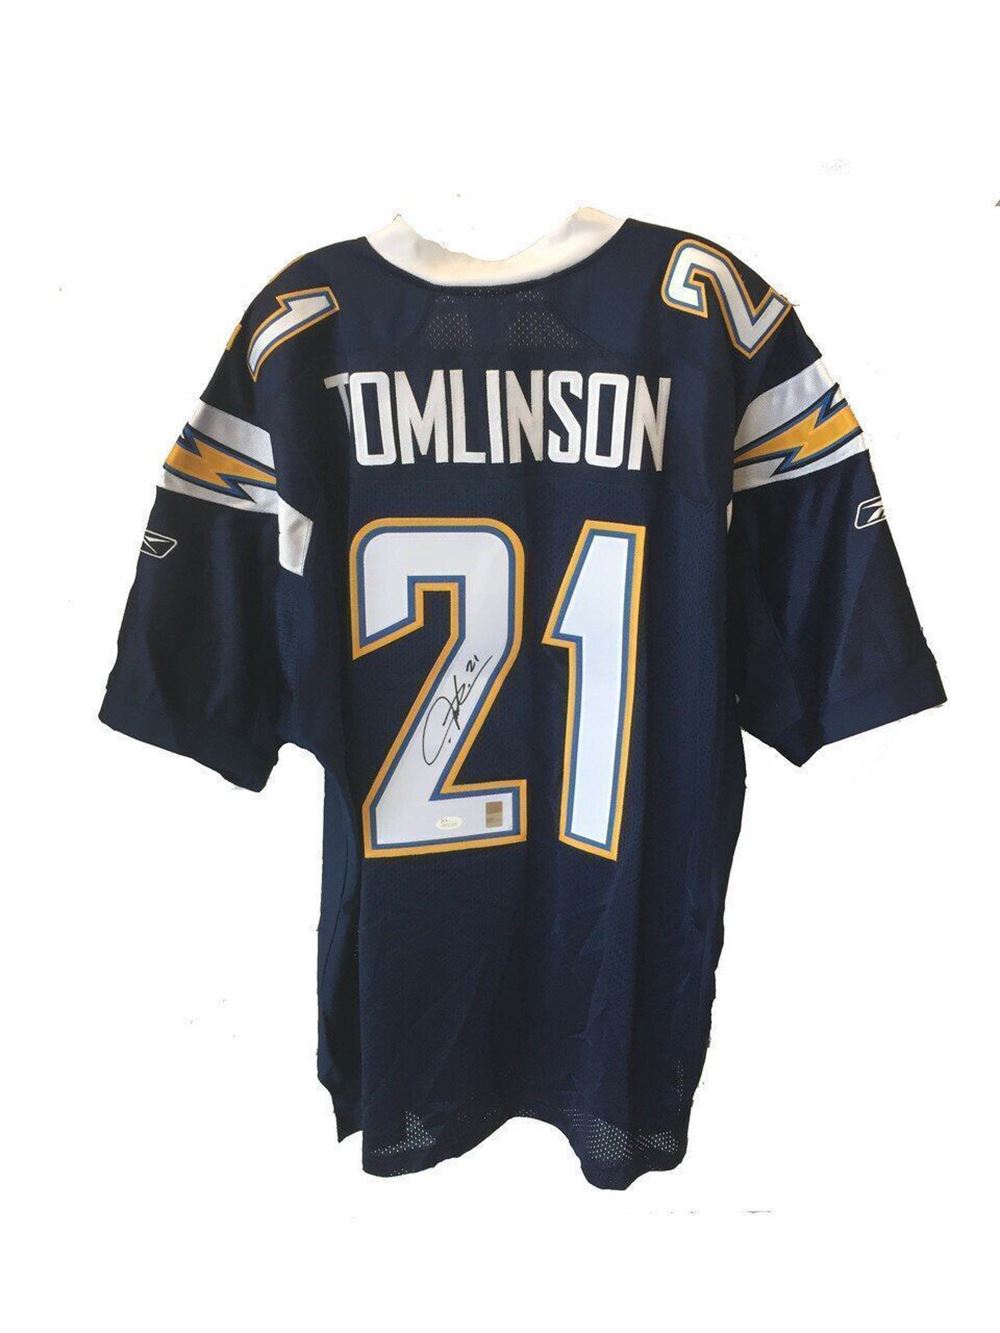 LaDainian Tomlinson San Diego Chargers Autographed Reebok Navy Sewn Jersey